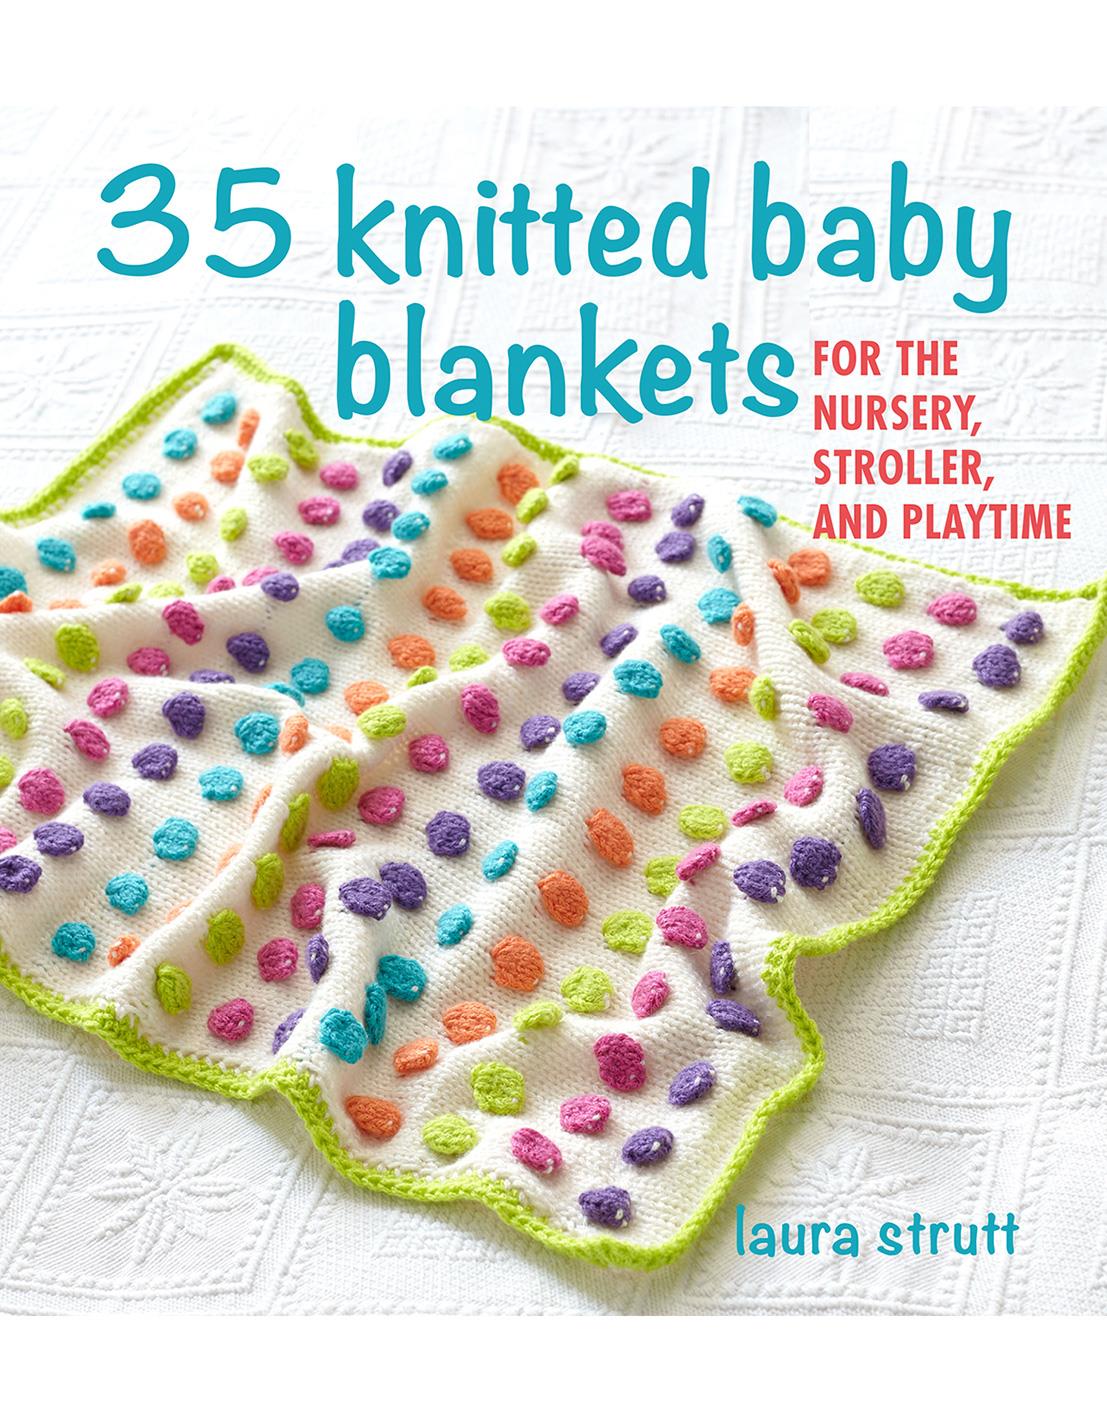 35 Knitted Baby Blankets - Pattern Book by Laura Strutt